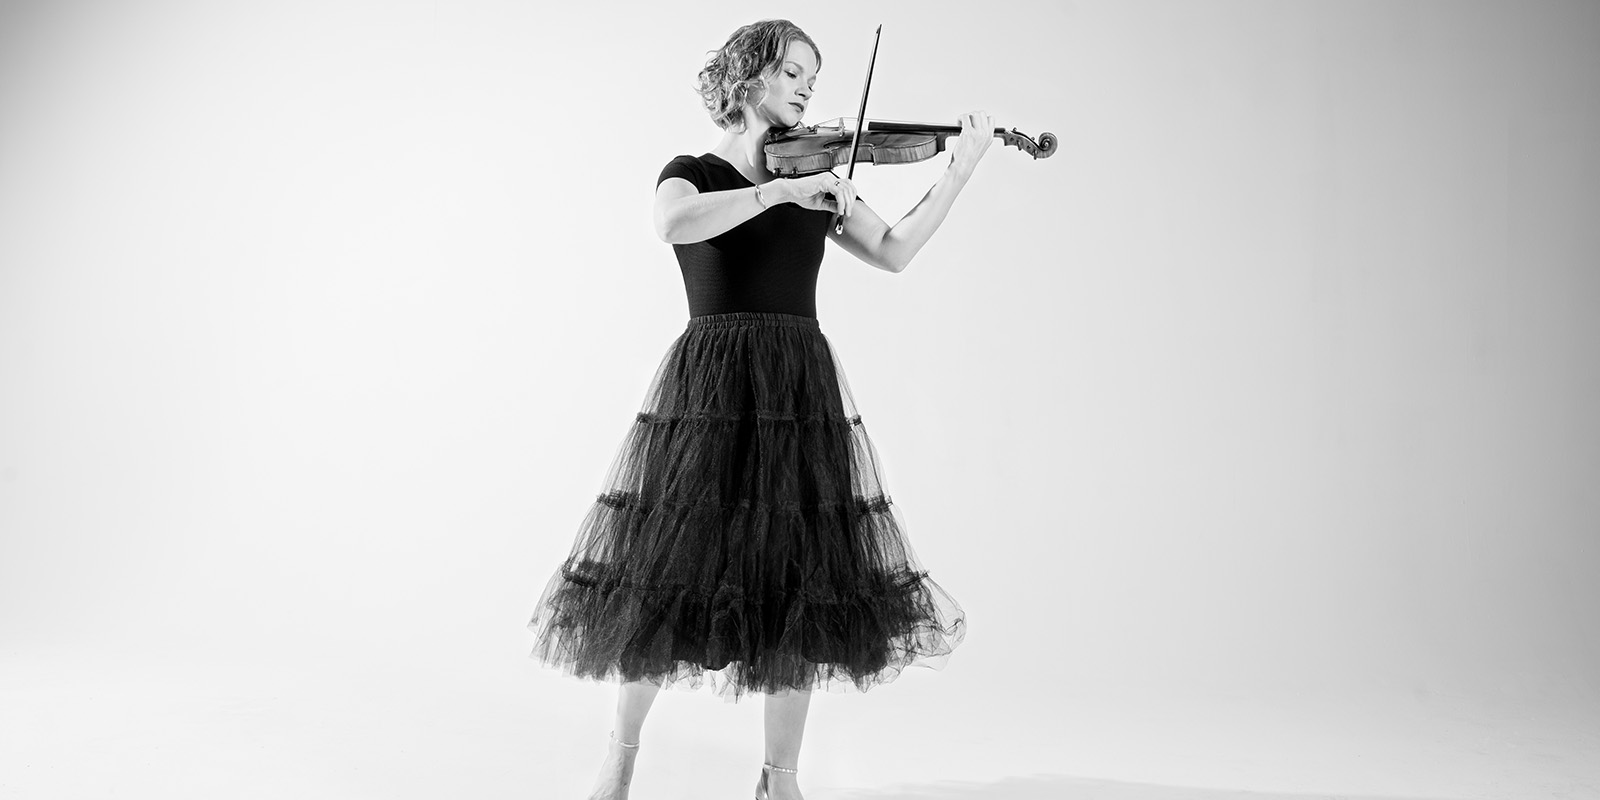 Celebrated Violinist Hilary Hahn to Appear Sept. 21 with All-Bach Program